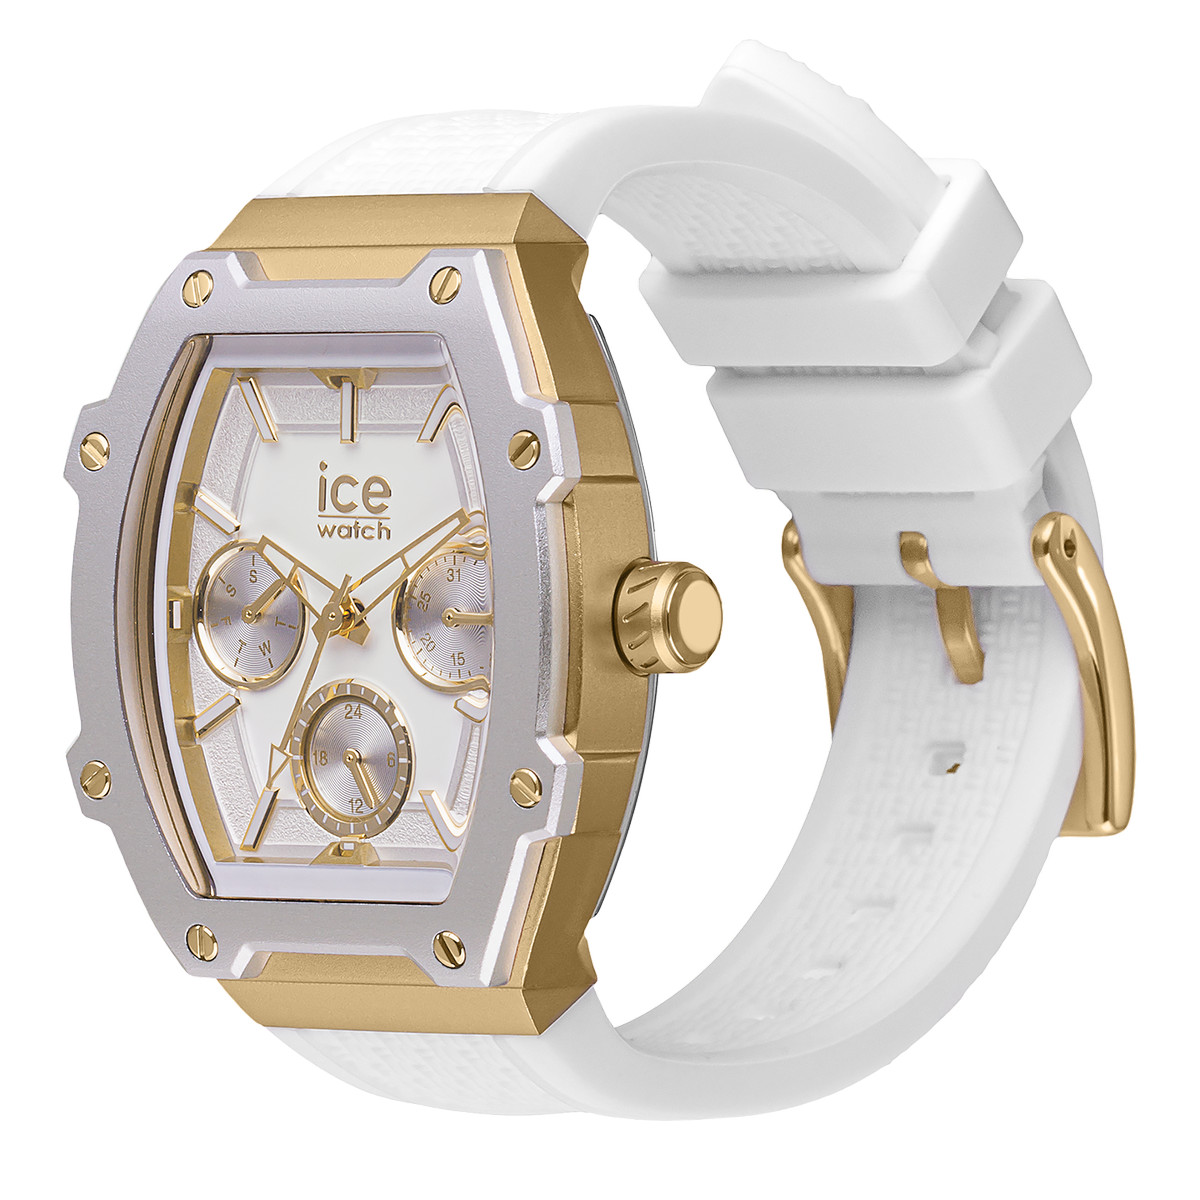 Montre ICE WATCH Ice boliday femme bracelet silicone blanc - vue D1